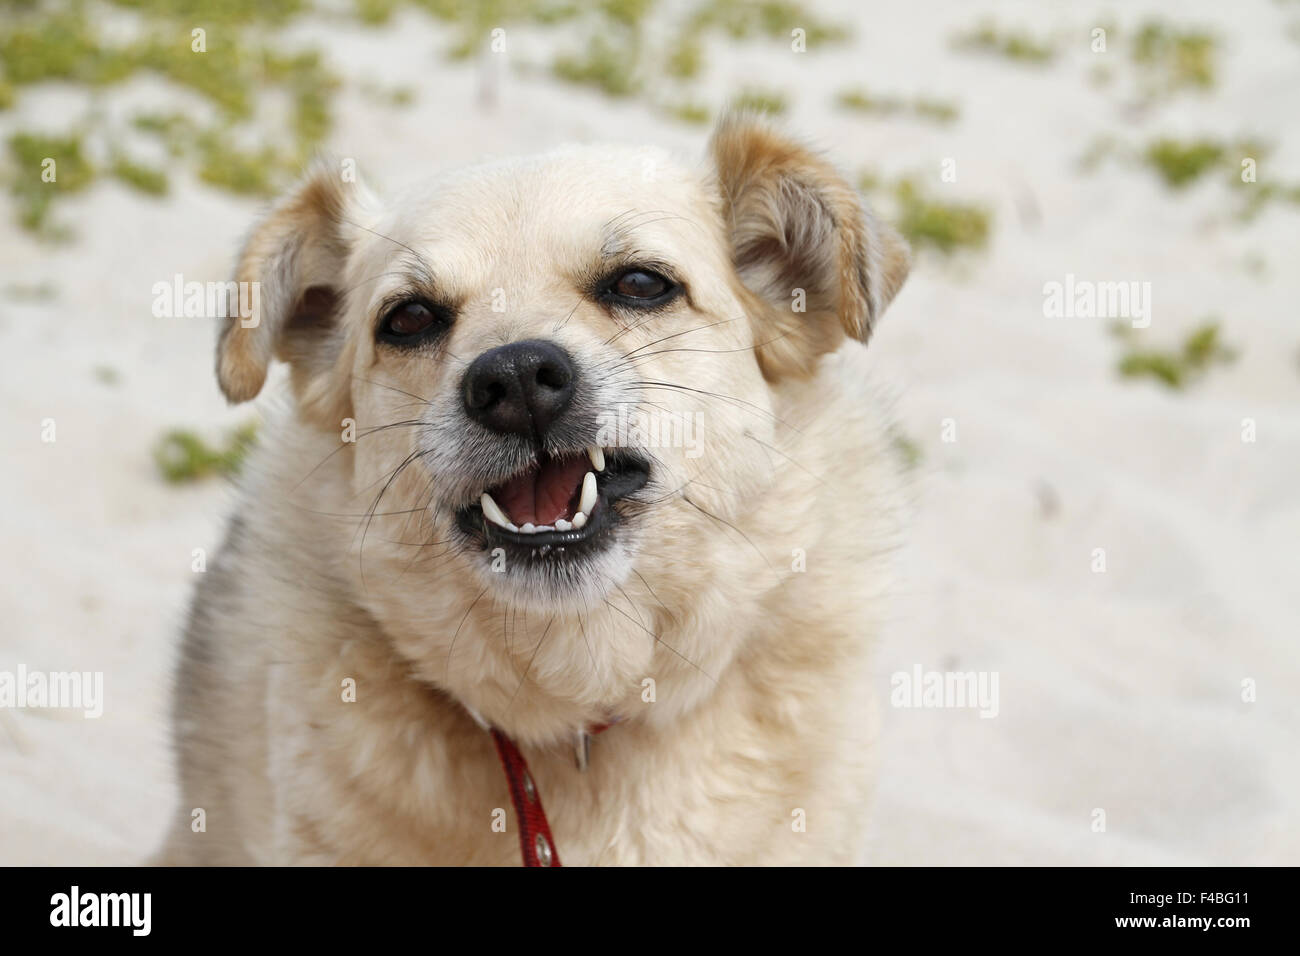 dog making a face Stock Photo